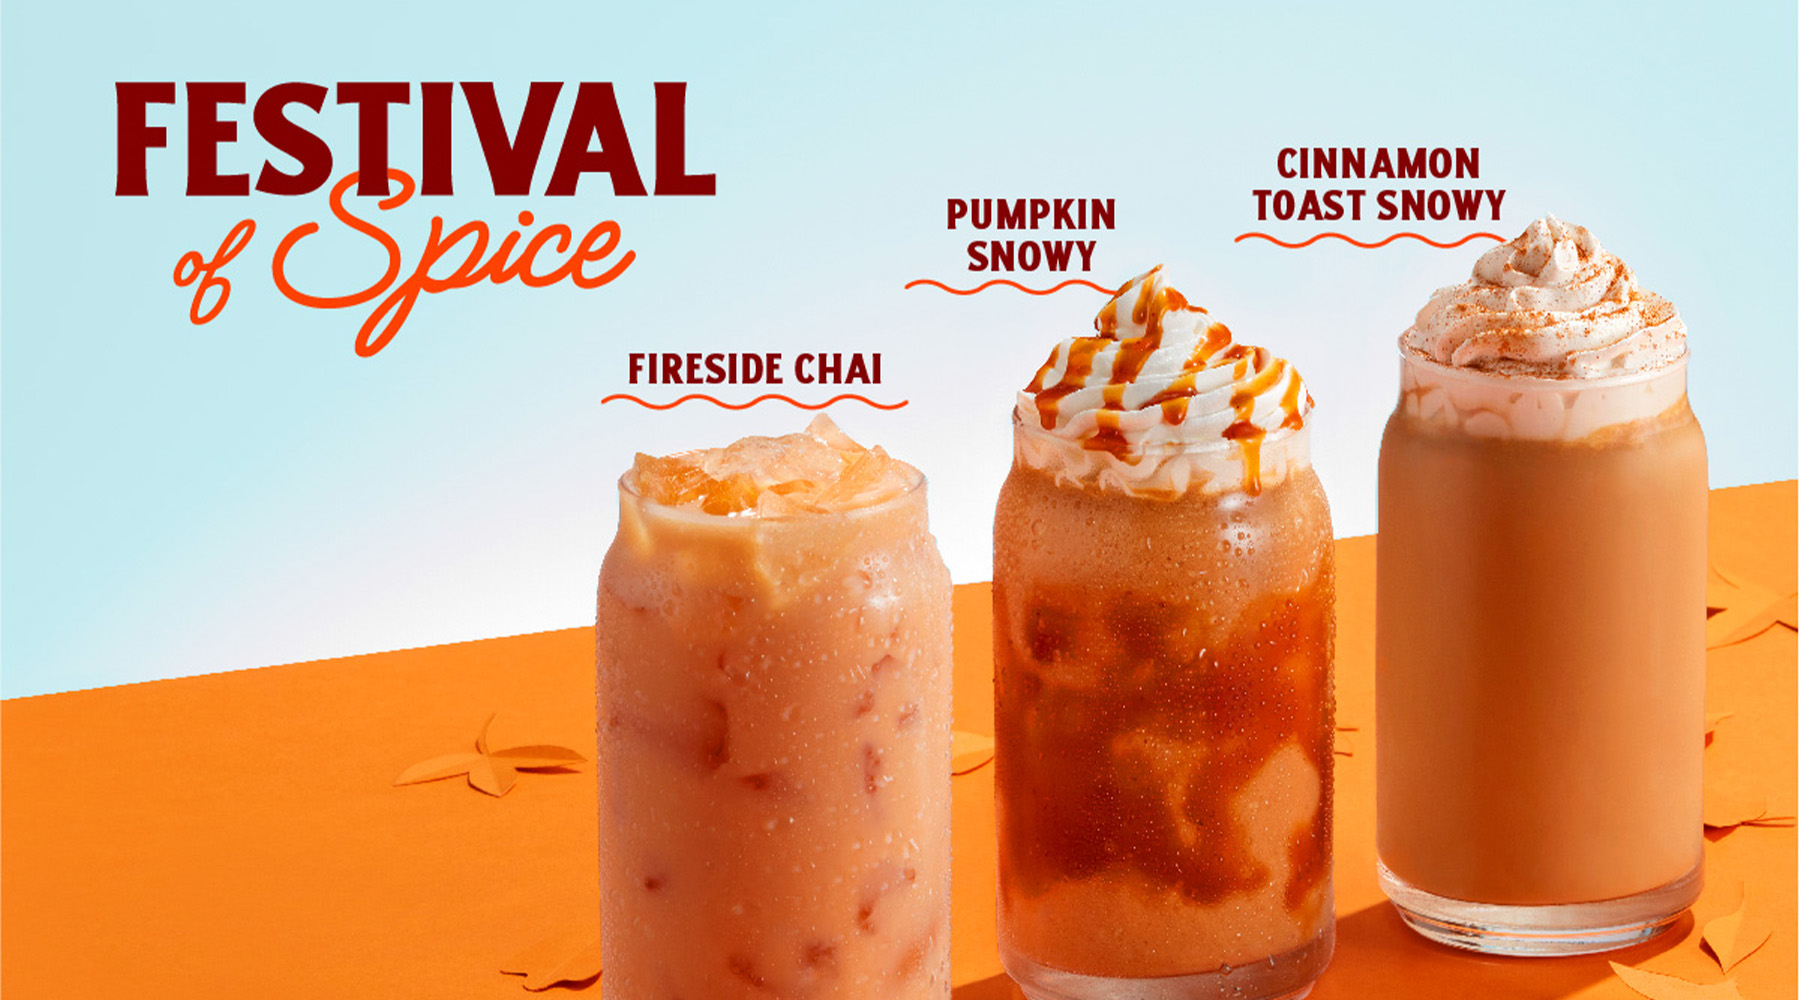 A drink promotion for THB's Festival of Spice